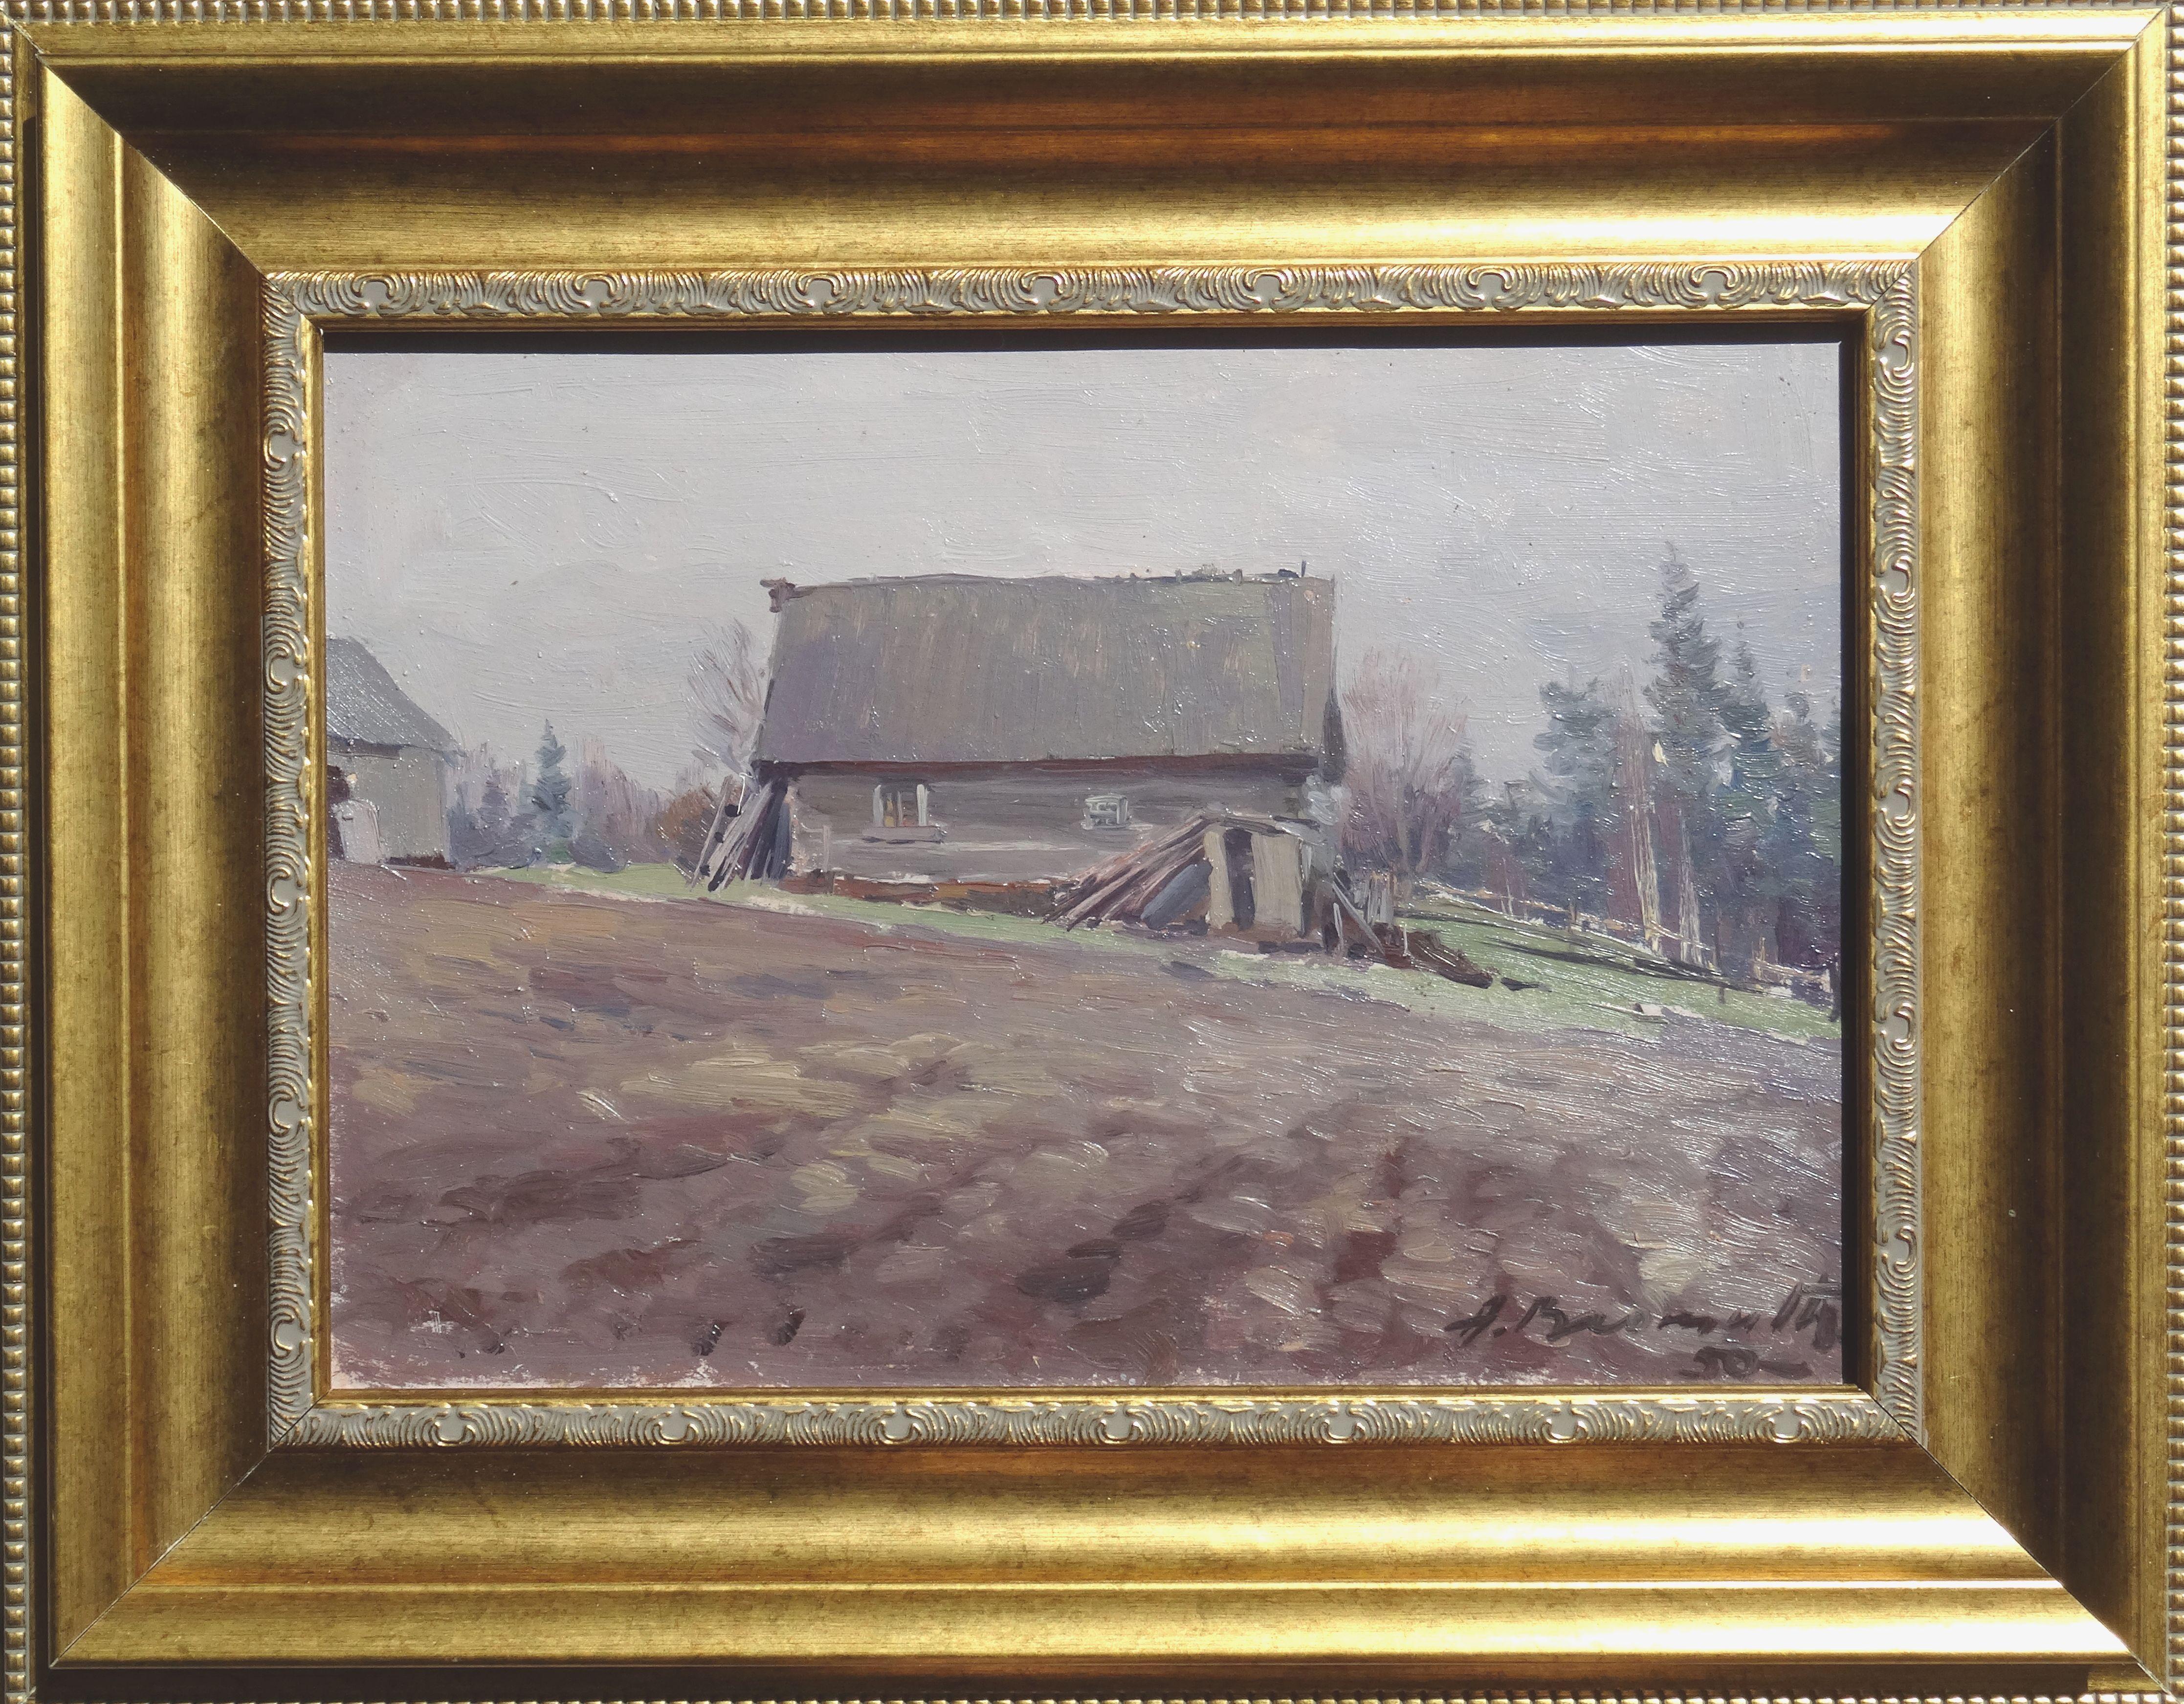  Countryside. 1950s, cardboard, oil, 26x37 cm - Painting by Alfejs Bromults